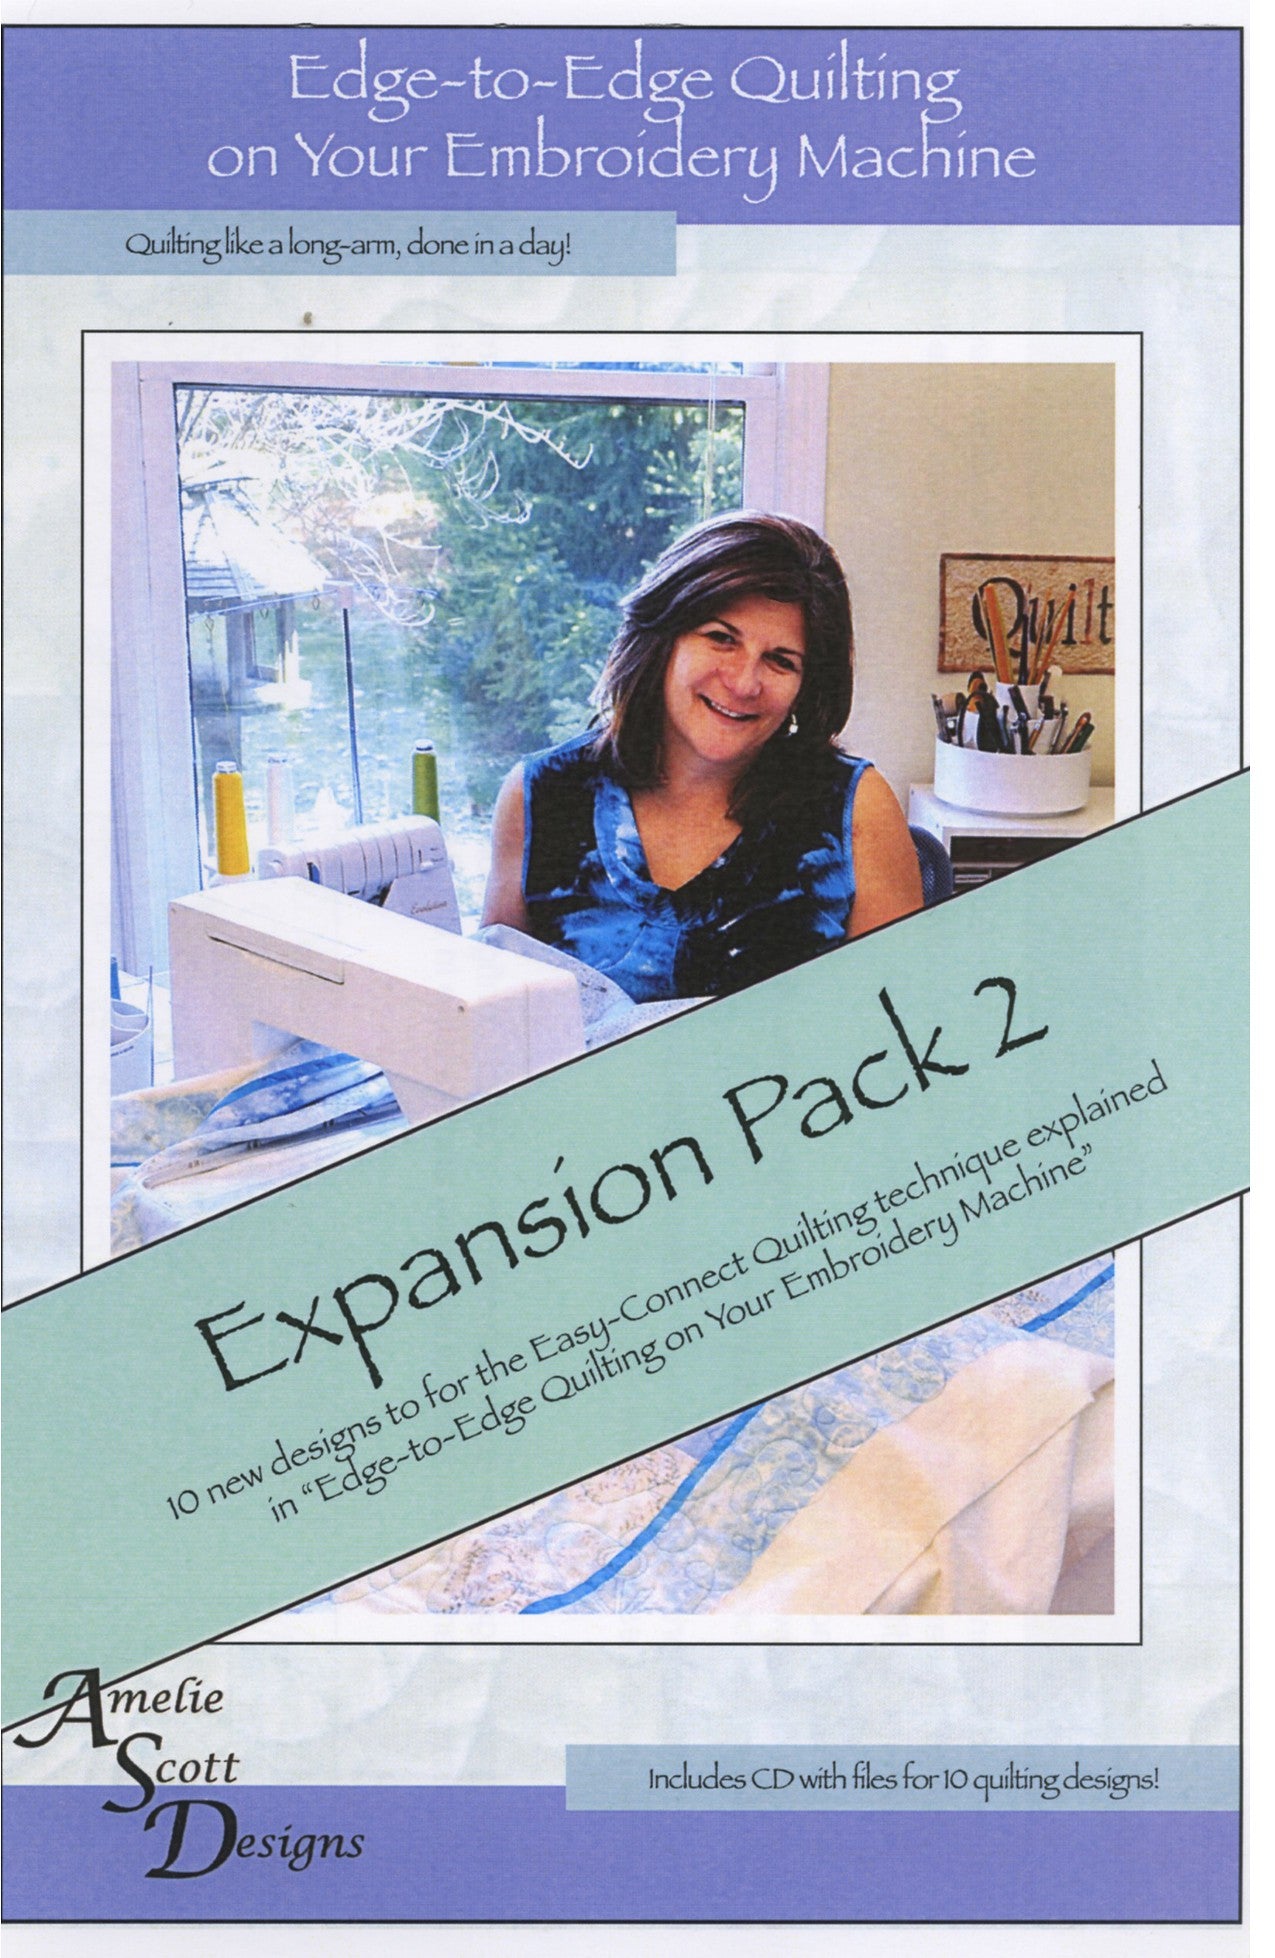 Edge-To-Edge Quilting On Your Embroidery Machine Expansion Pack 2 by Amelie Scott Designs